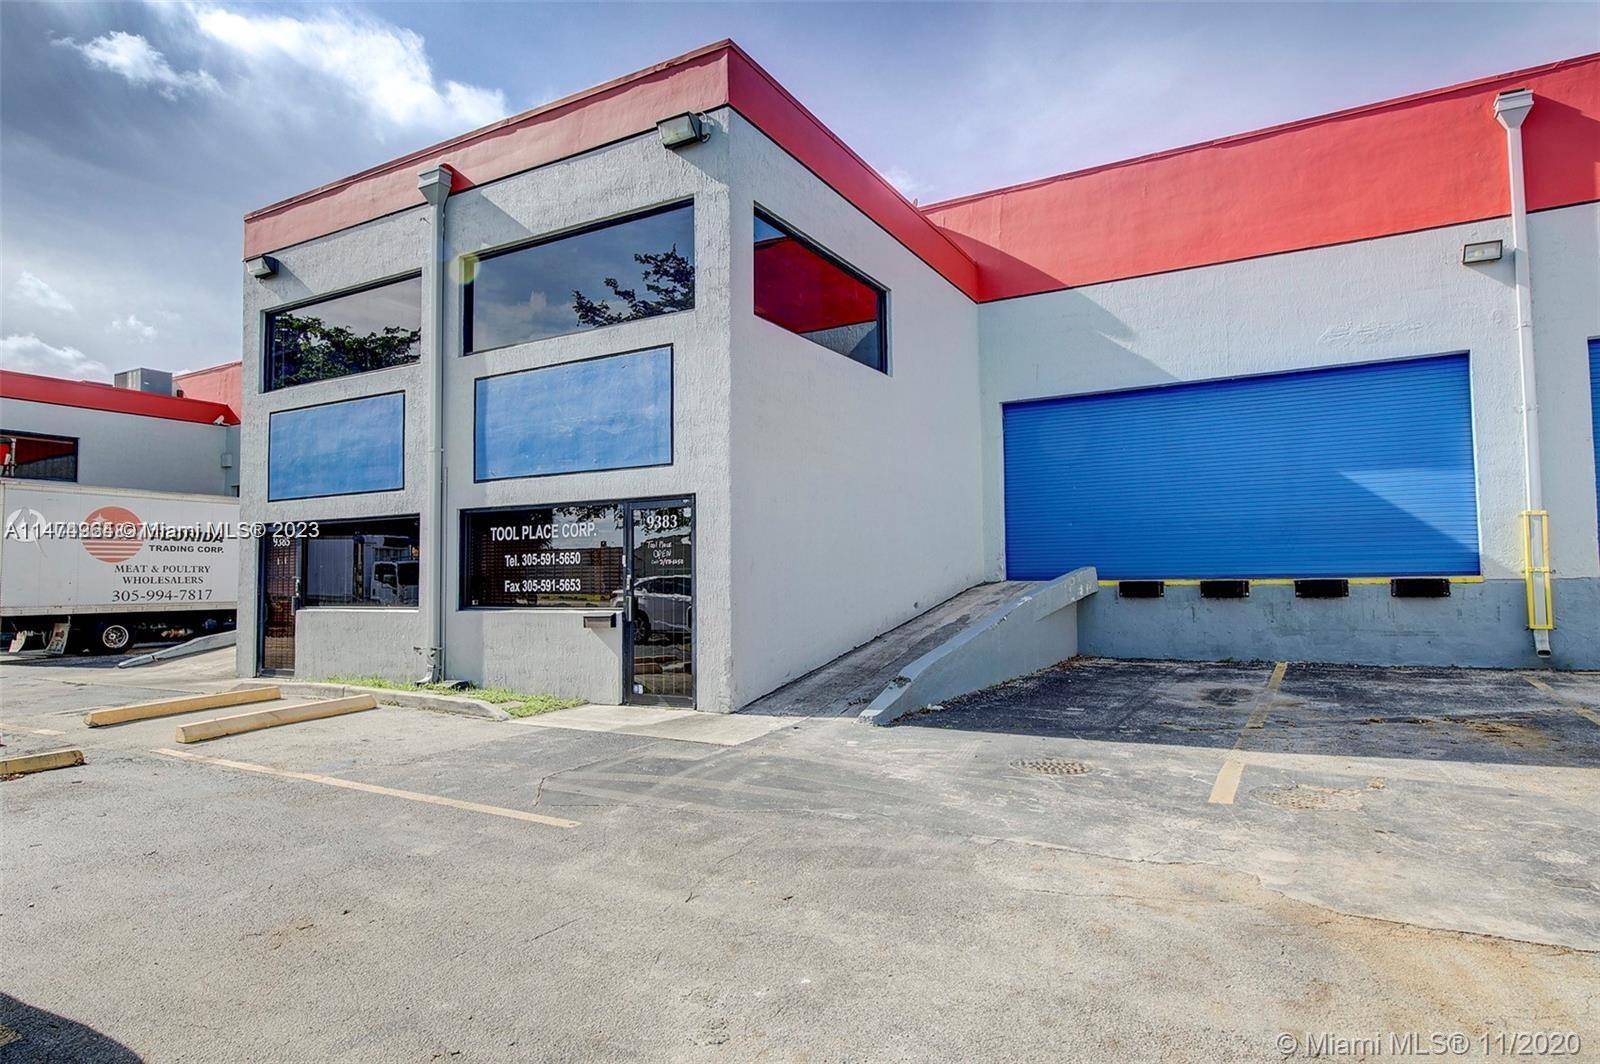 TWO UNITS FOR SALE CONNECTED 9383 9385 Two Dock High Warehouses combined to a total of 7, 920 SF which includes reception area, private offices, conference room, cubicles, kitchenette and ...